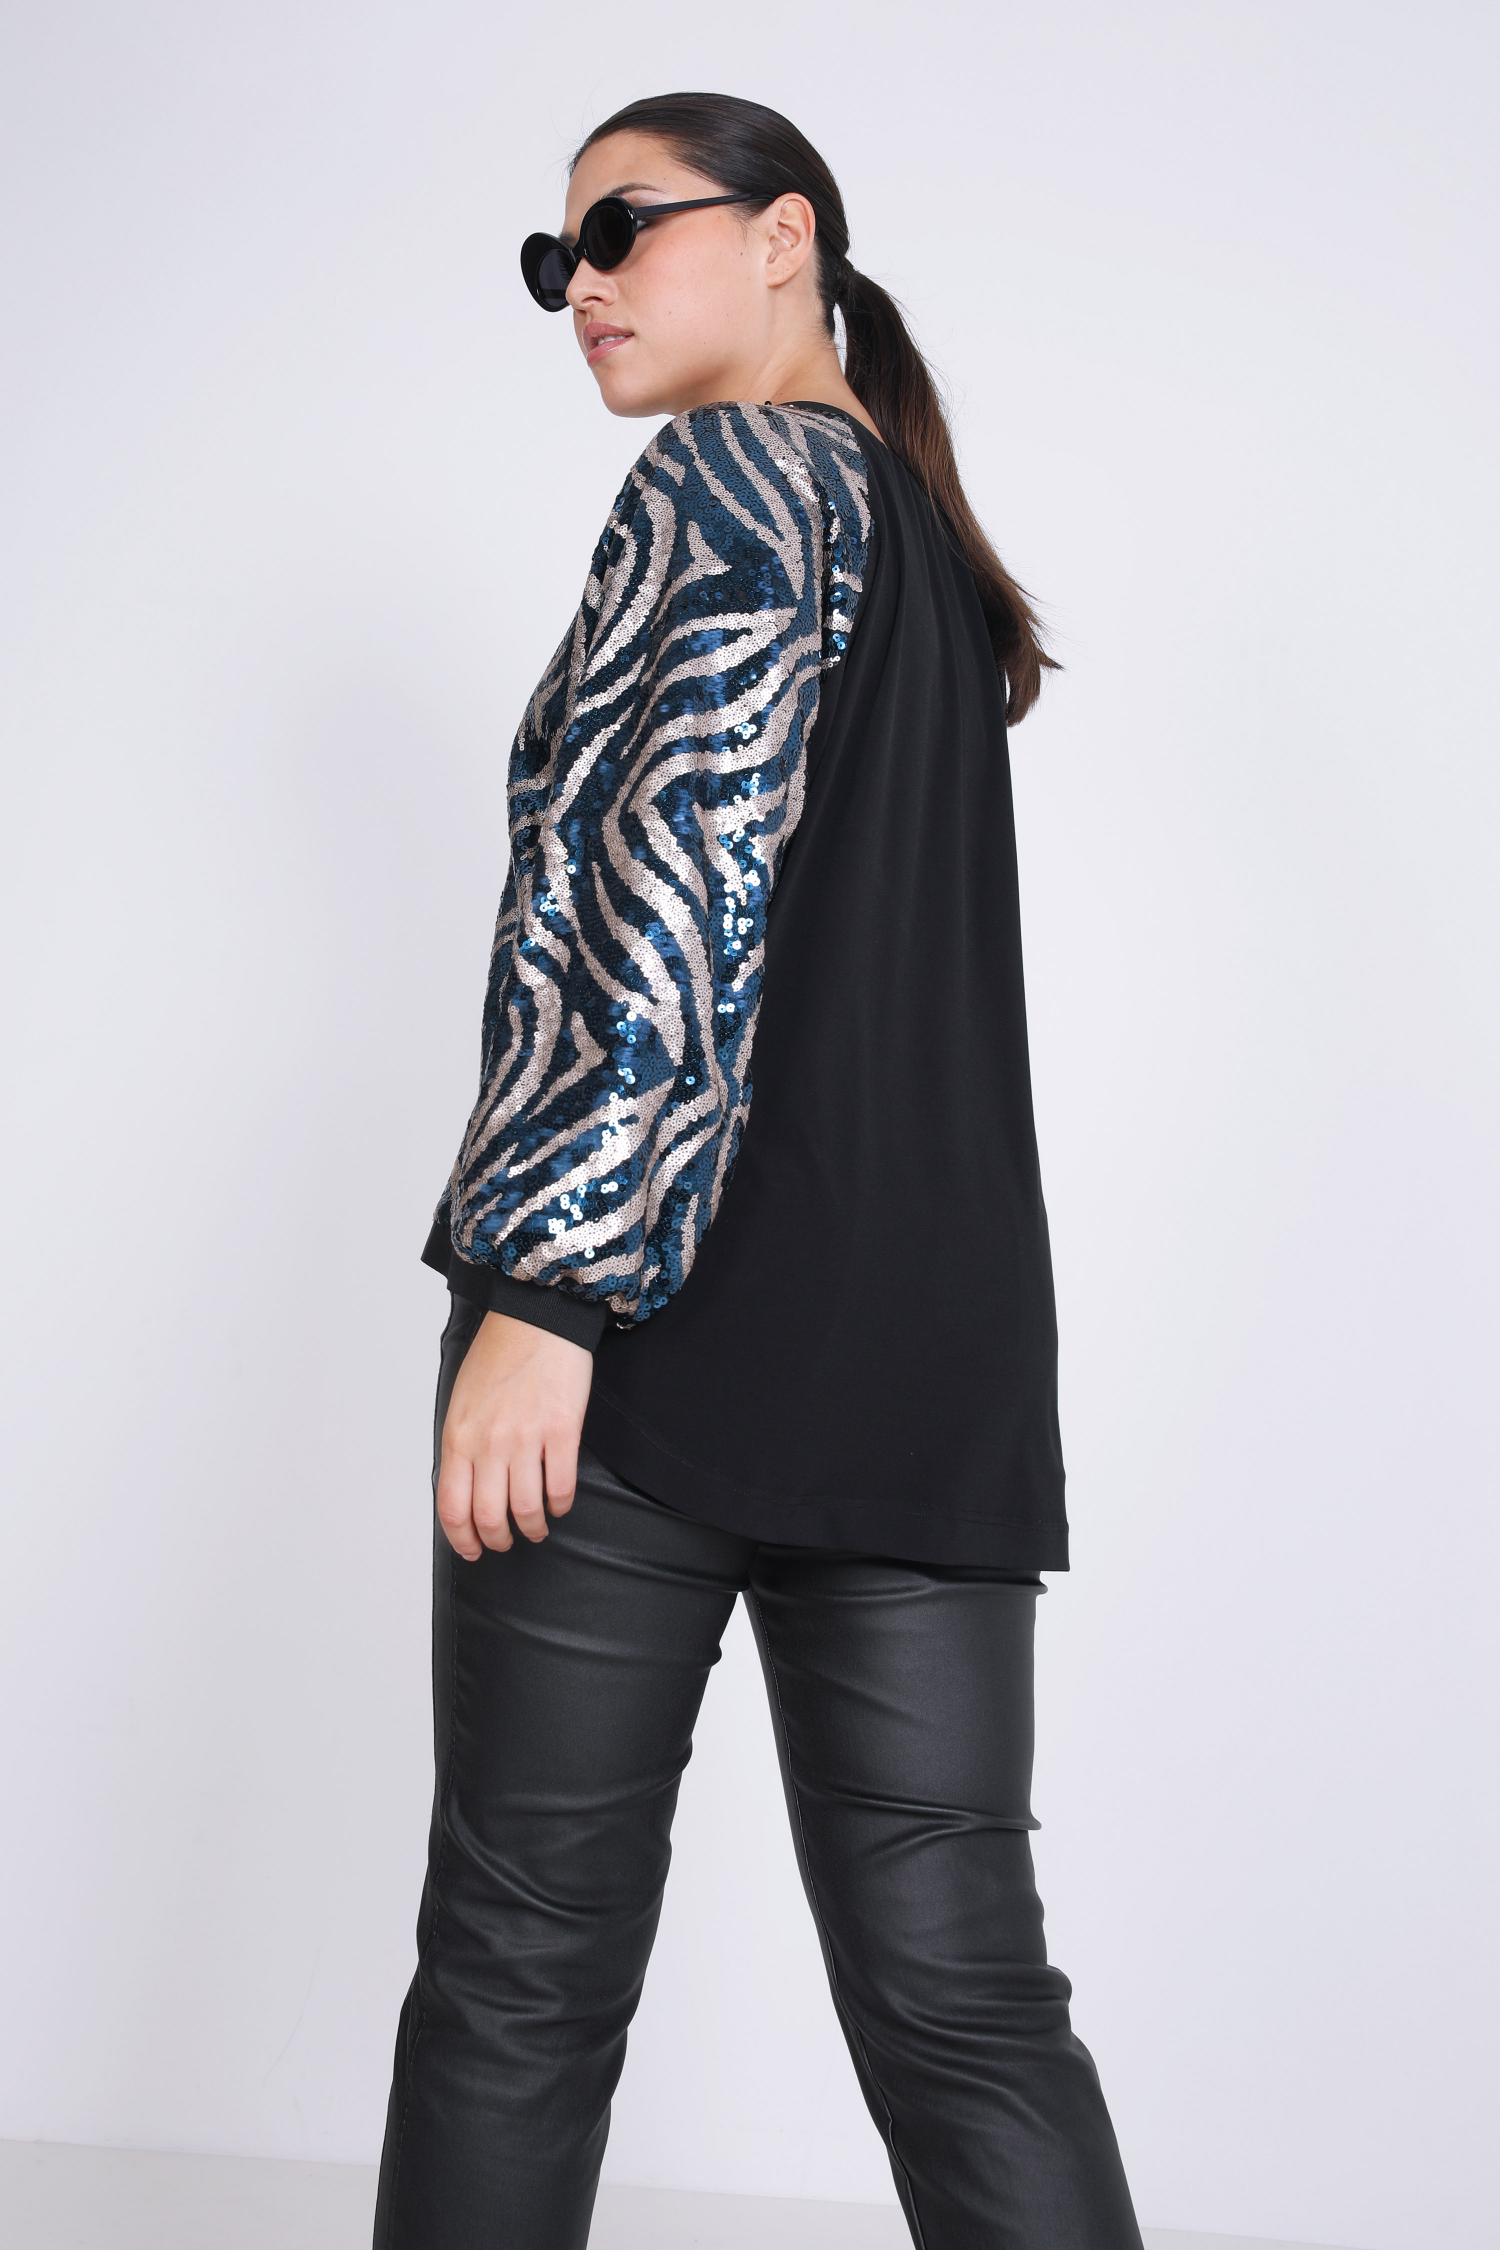 T-shirt in printed sequins and plain knit